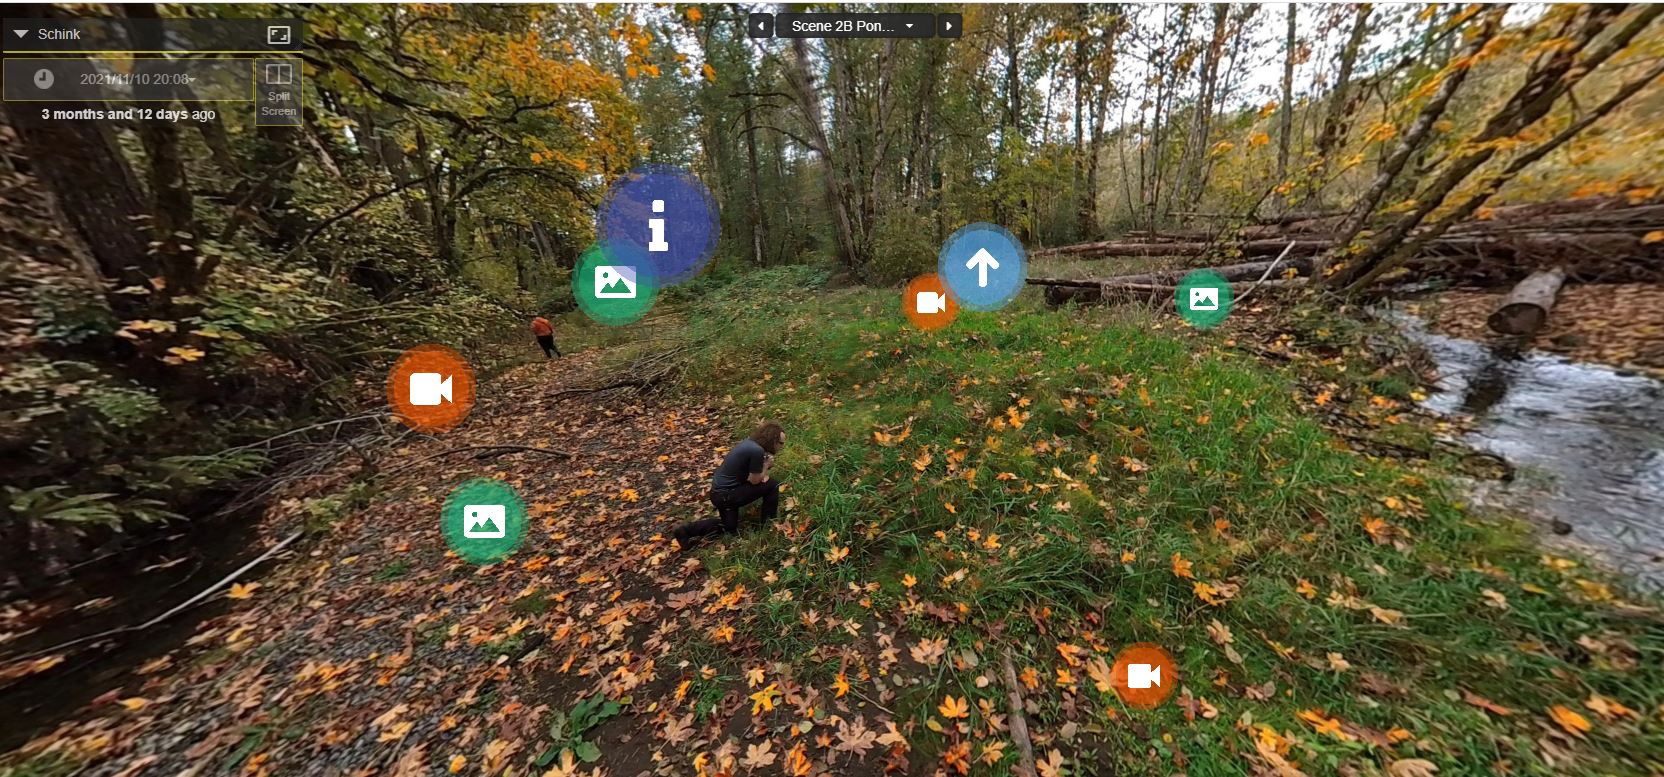 Image of forest trail with man kneeling to look closely at moss along the trail. The image is overlayed with various icons created through the Virtual Field Environment (VFE) tour software.